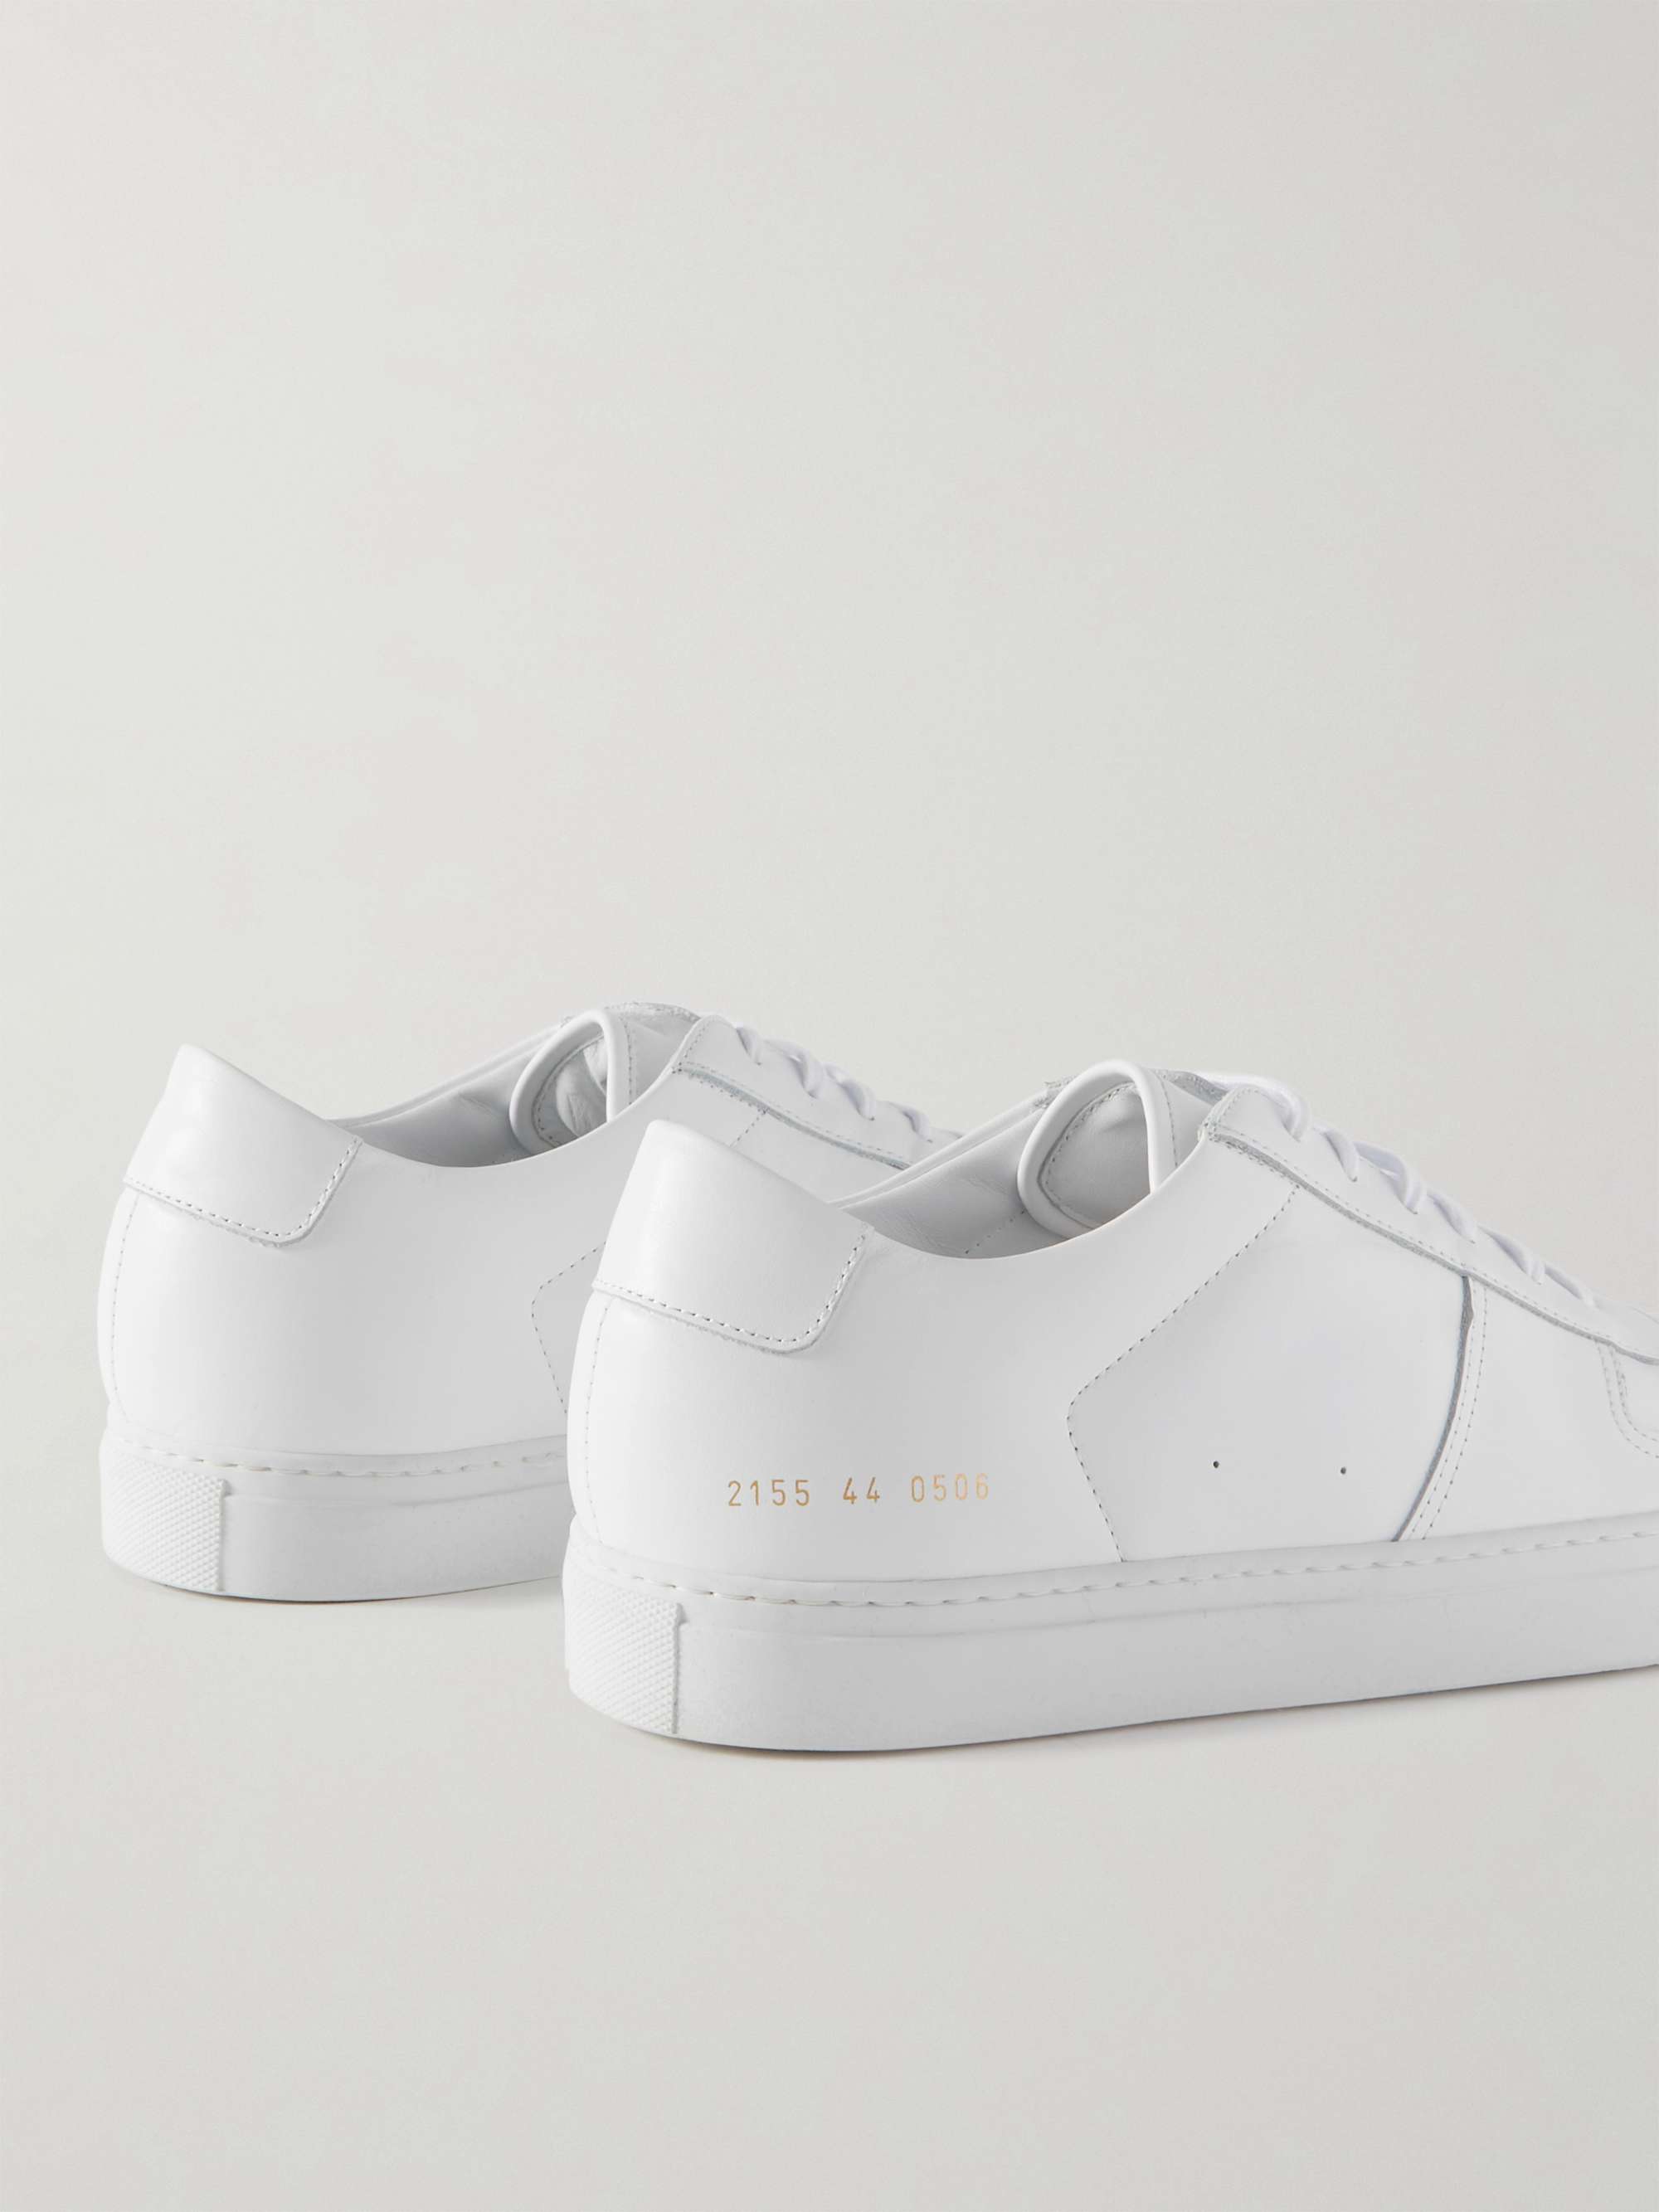 COMMON PROJECTS BBall Leather Sneakers | MR PORTER